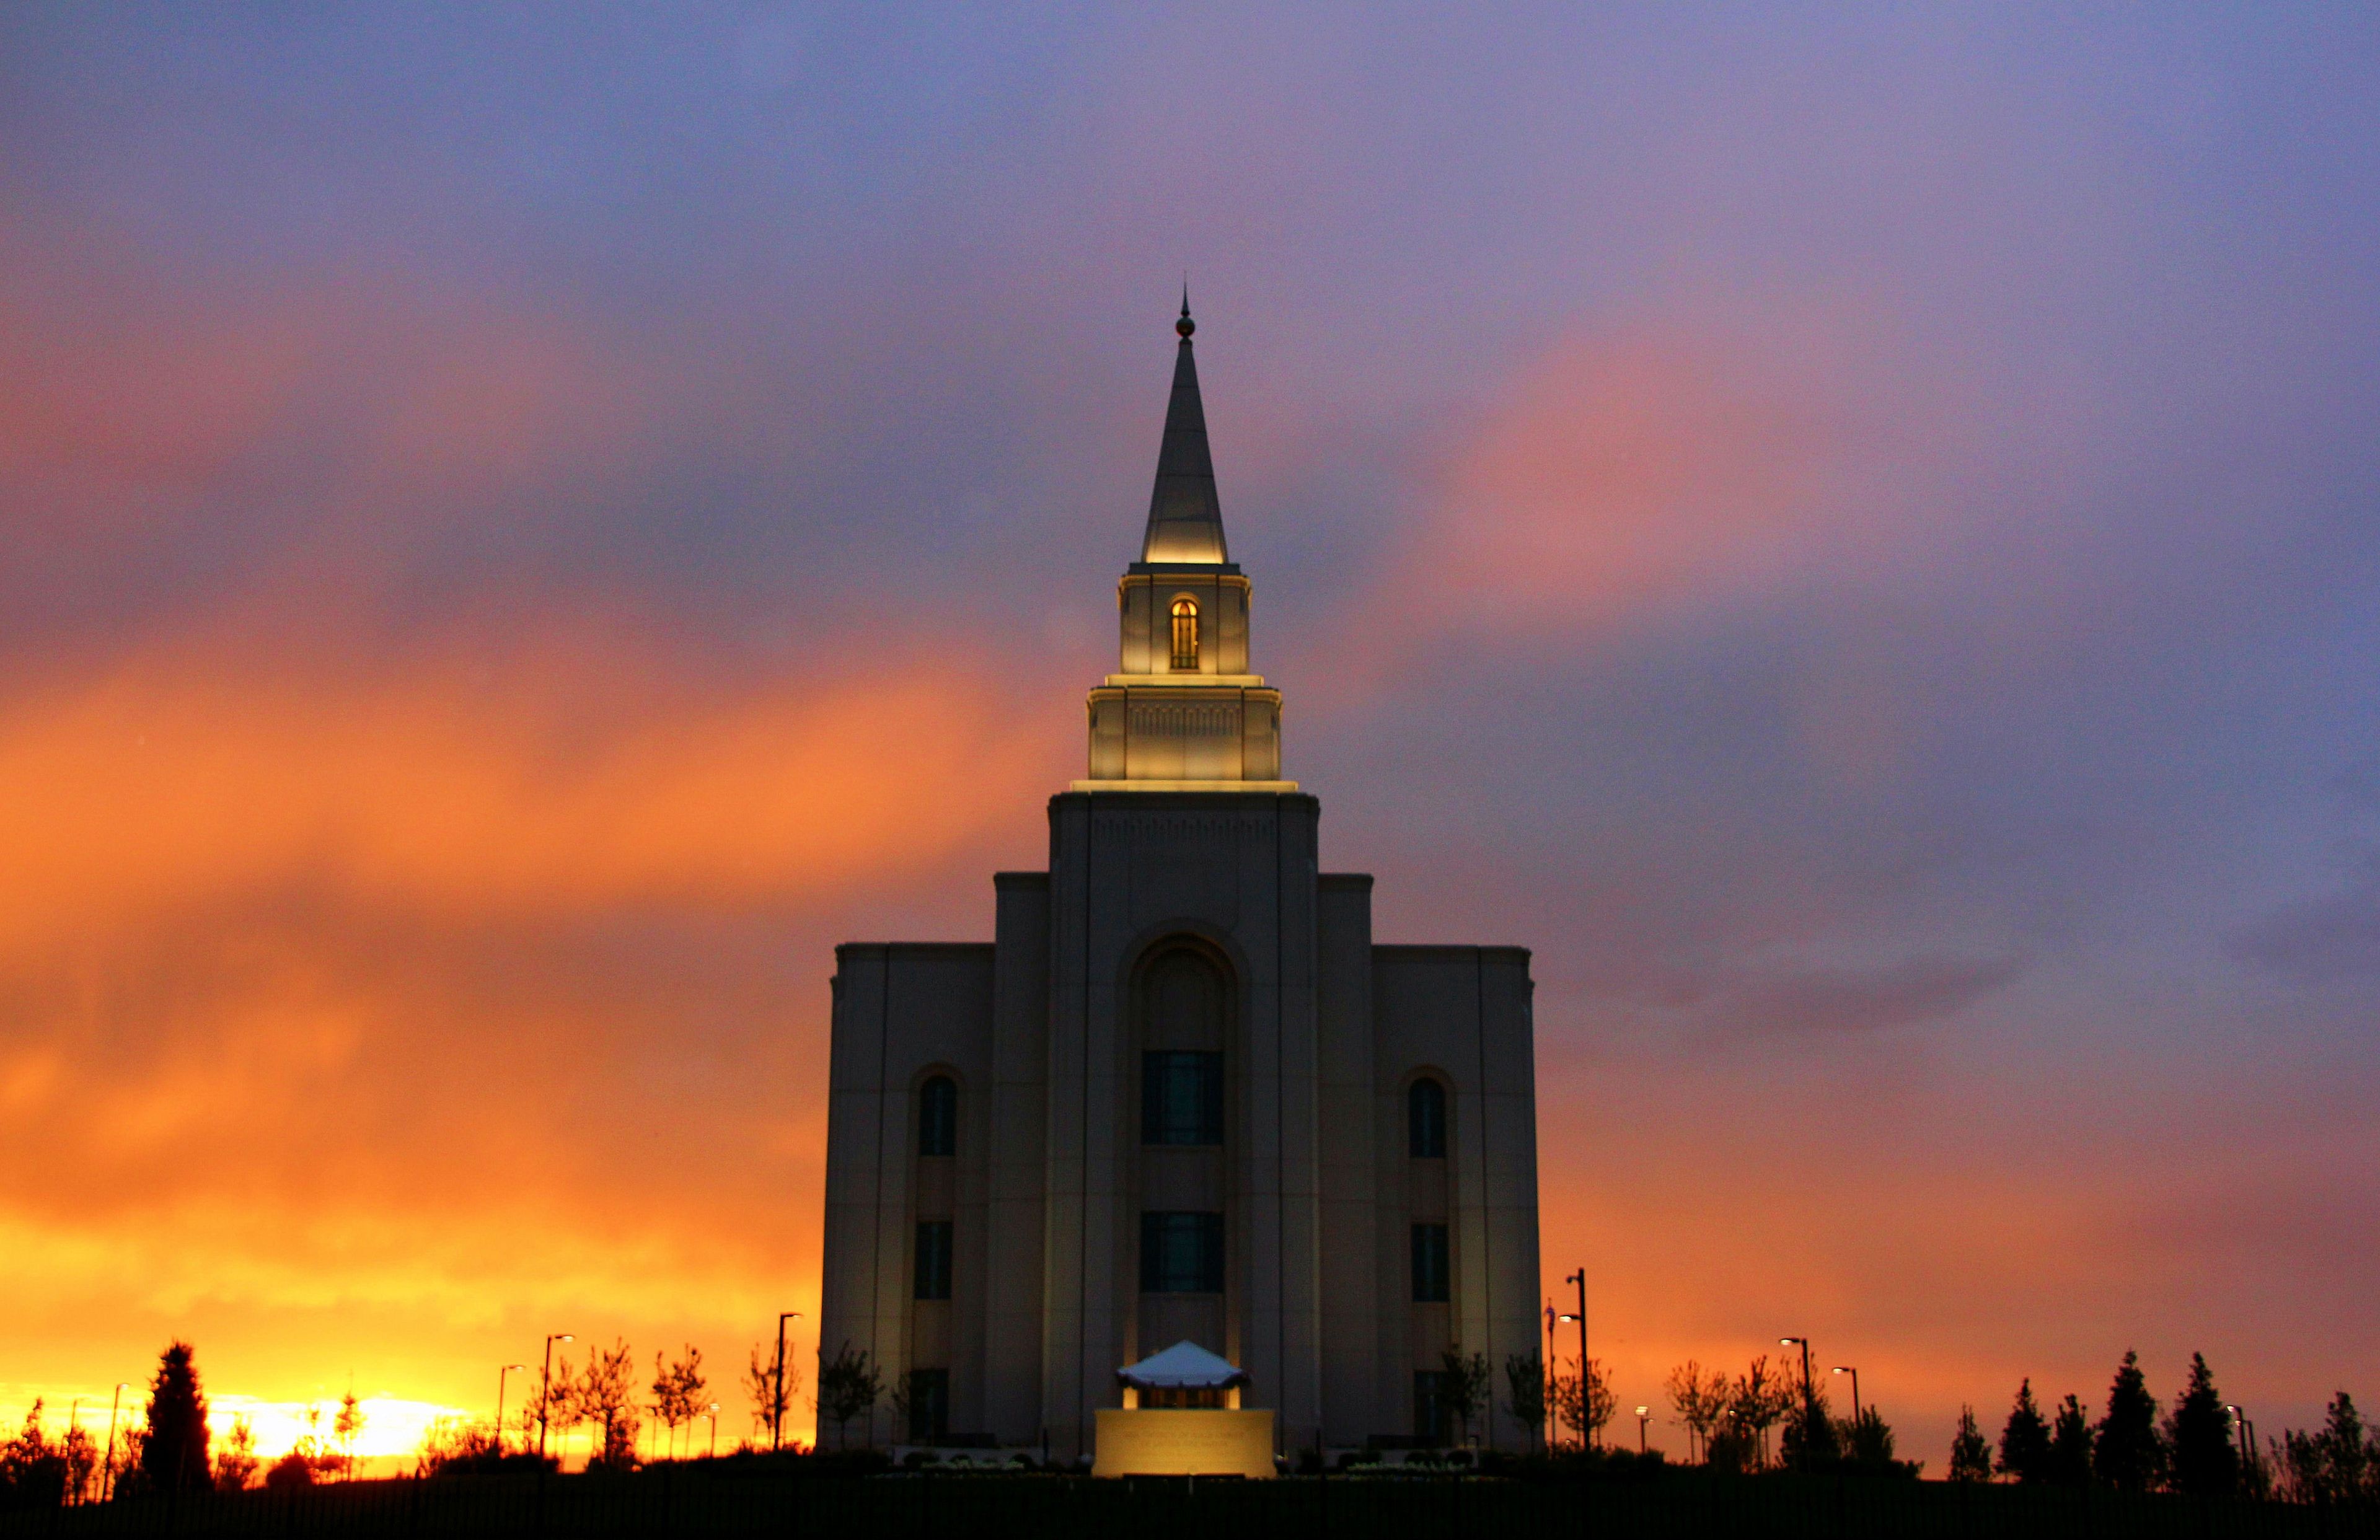 The front of the Kansas City Missouri Temple at sunset.